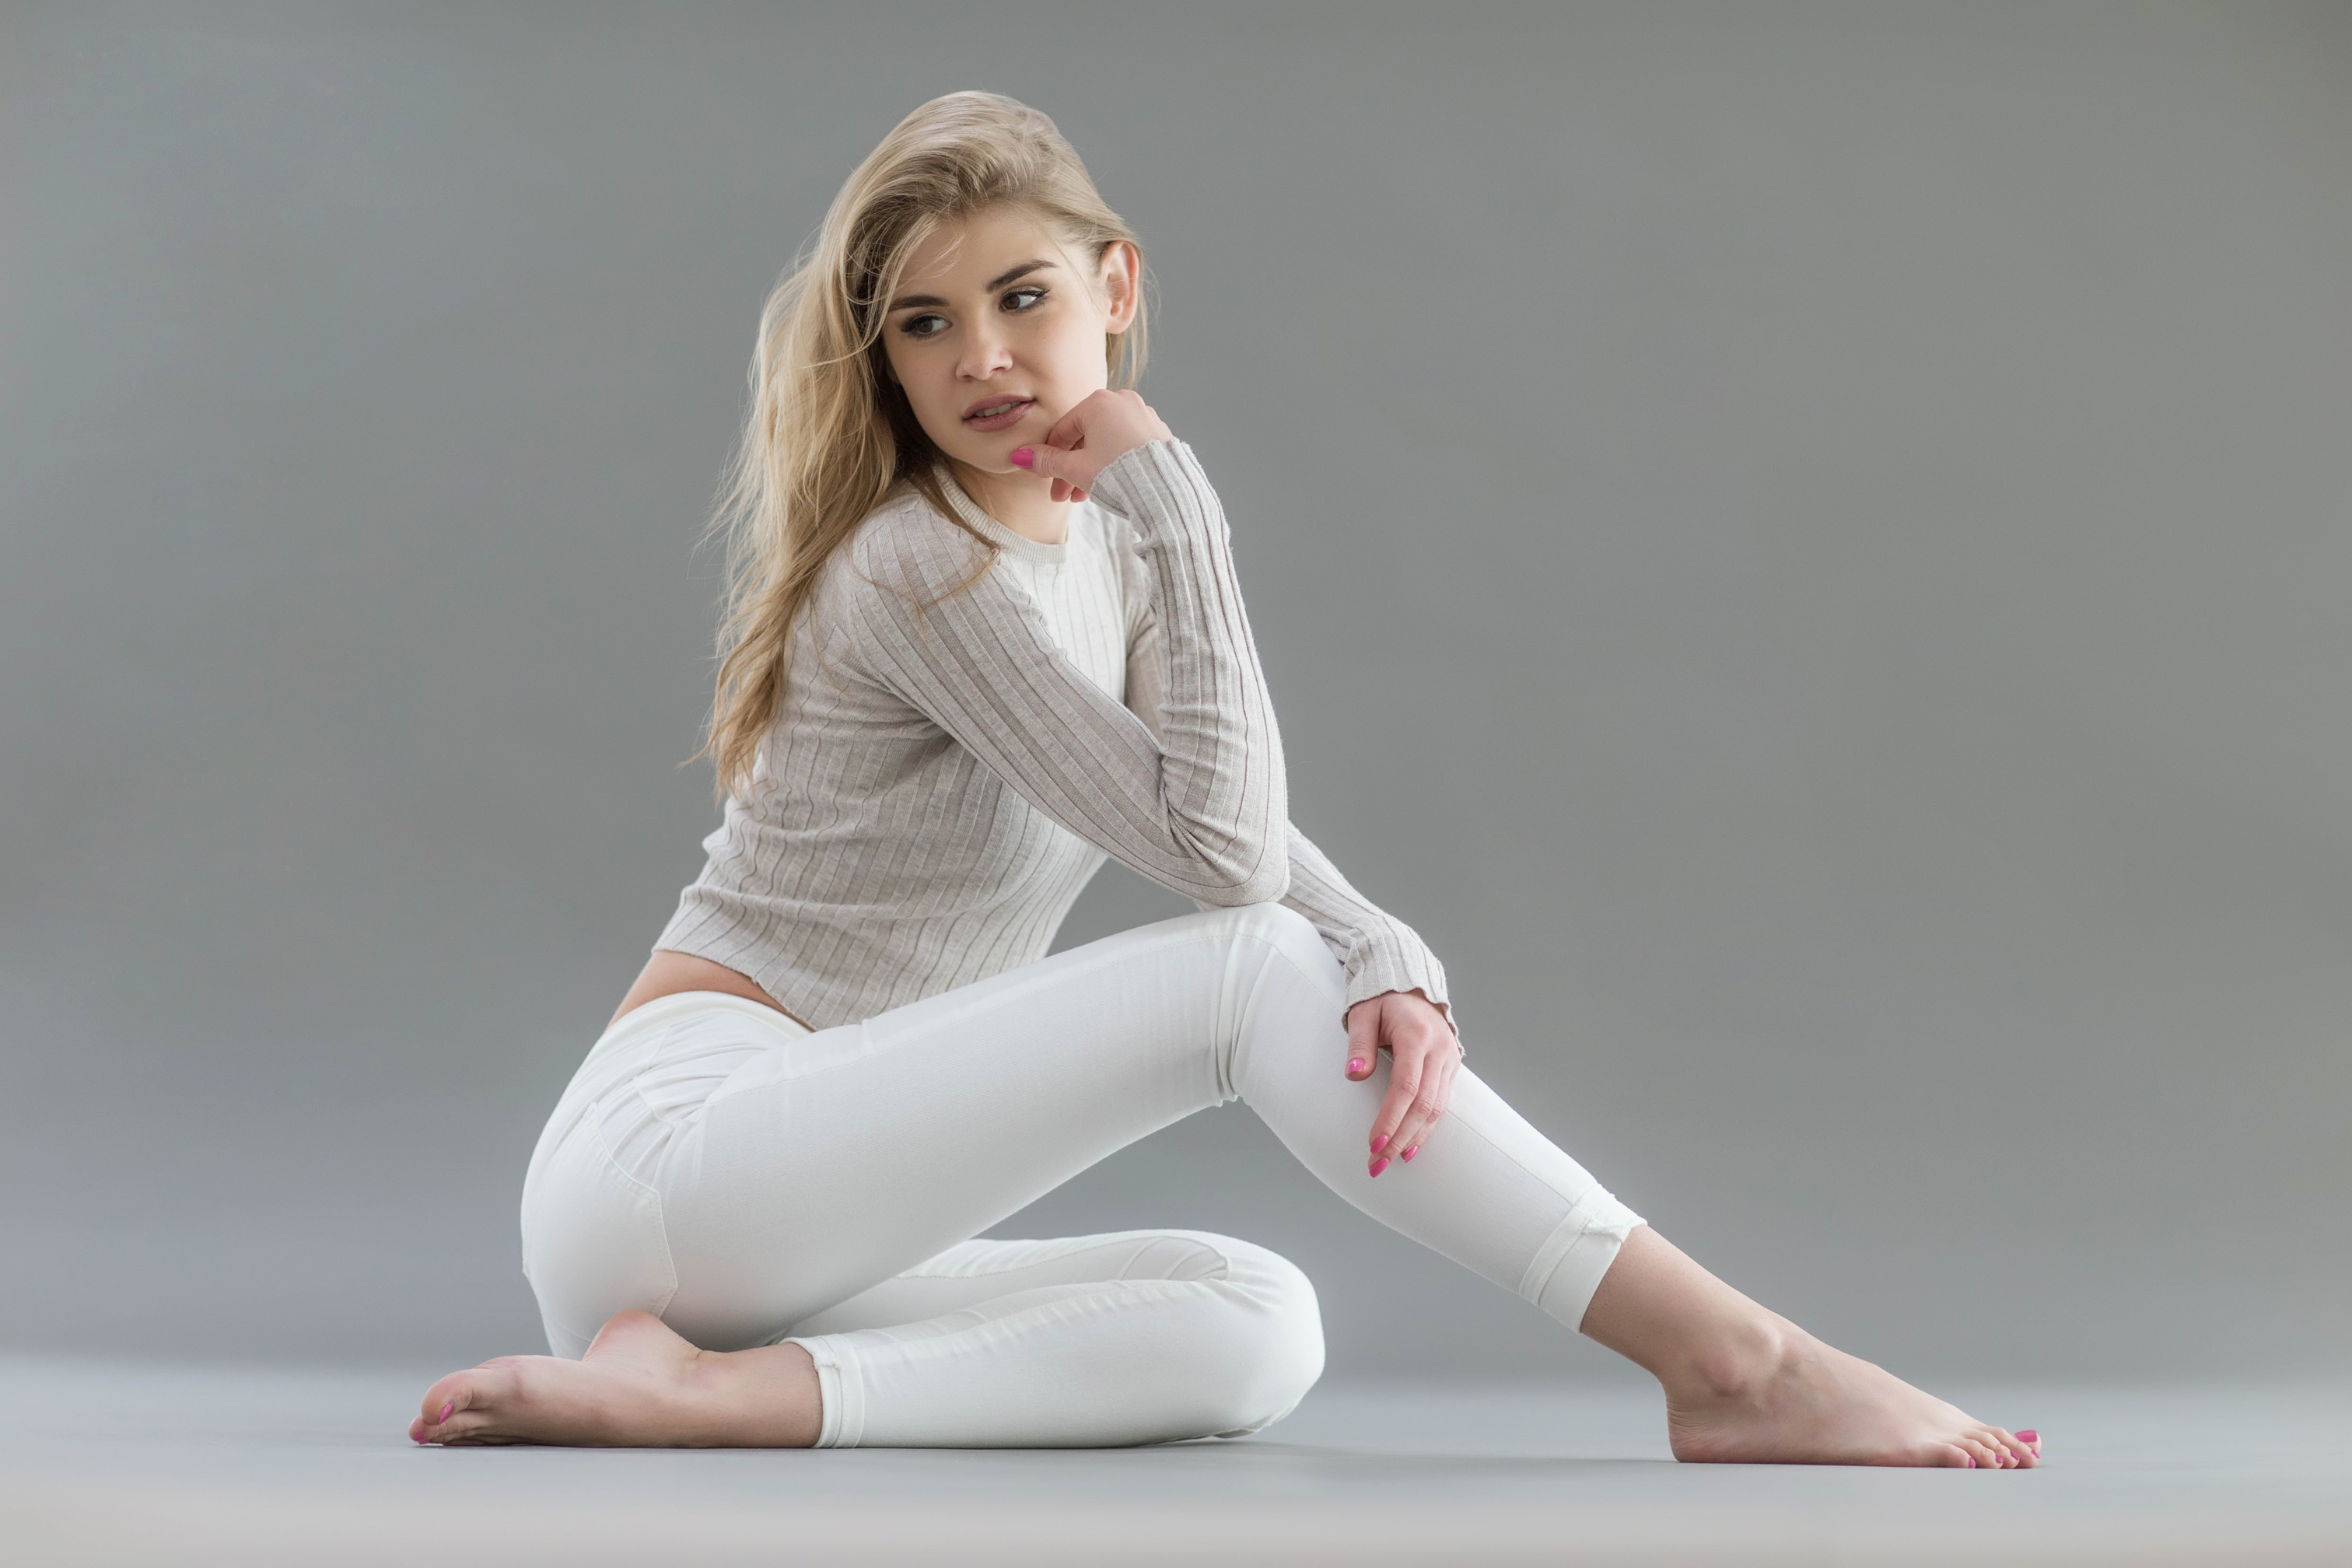 Tips to Keep Your White Jeans White Sudocrem Skin Care Blog image